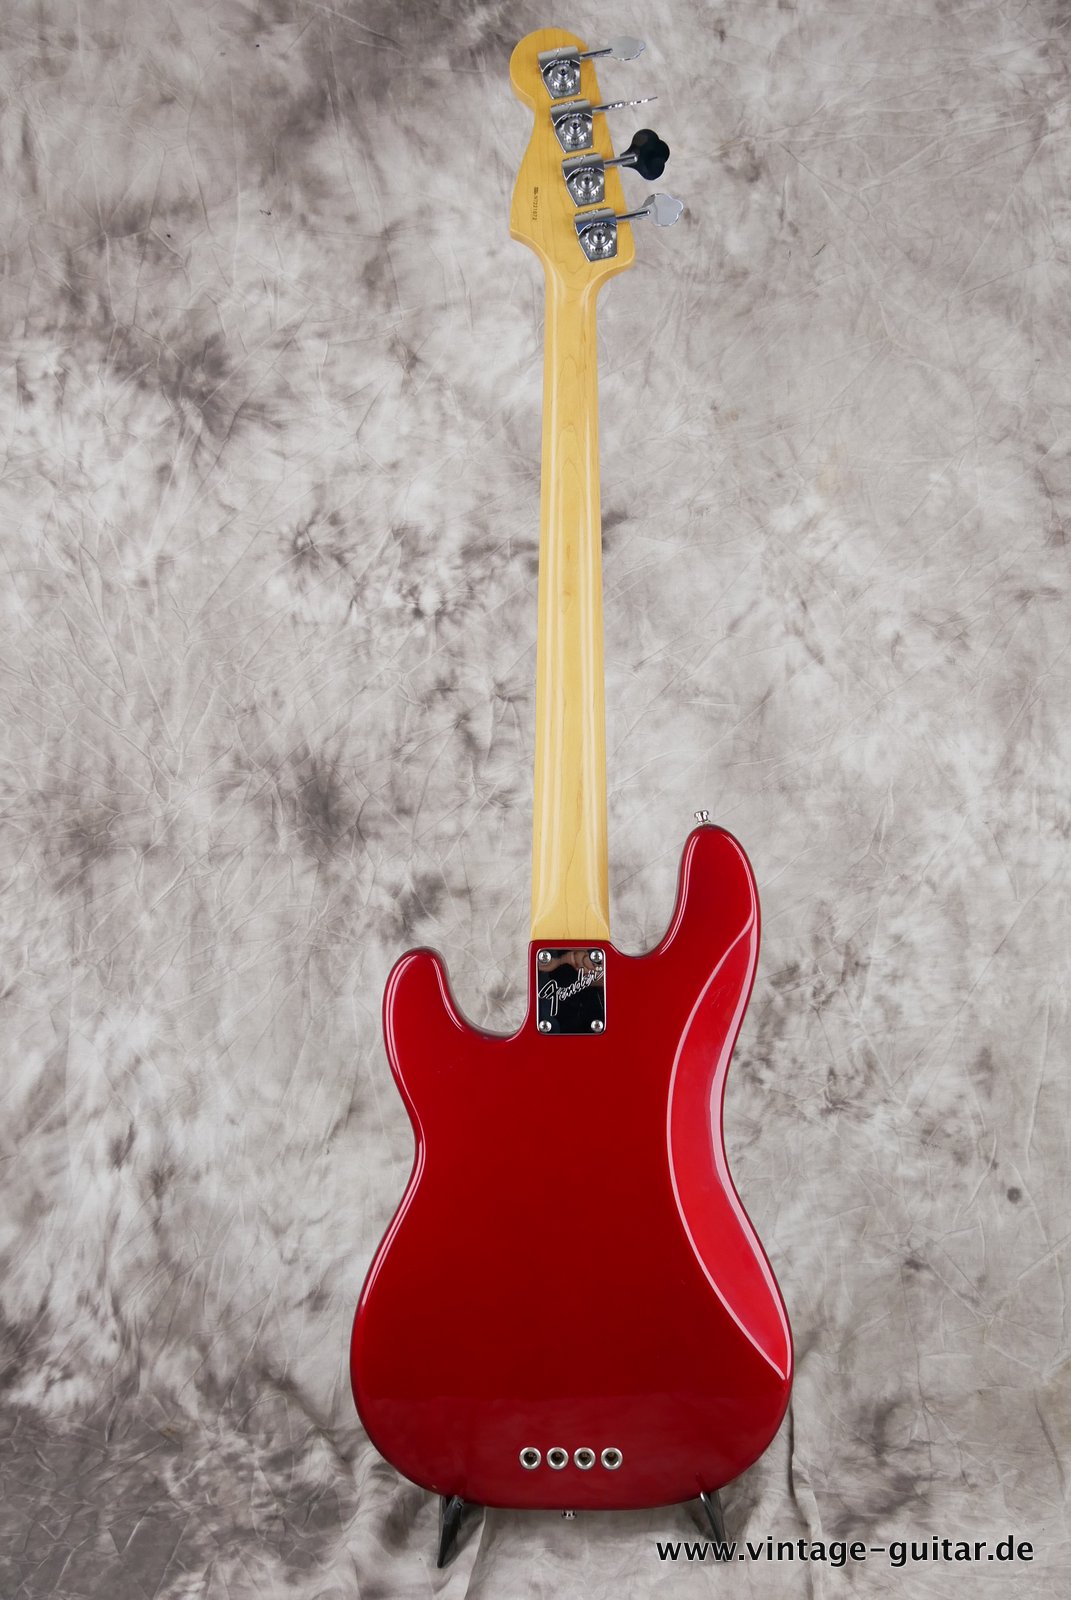 Fender-Precision-Bass-1994-candy-apple-red-003.JPG